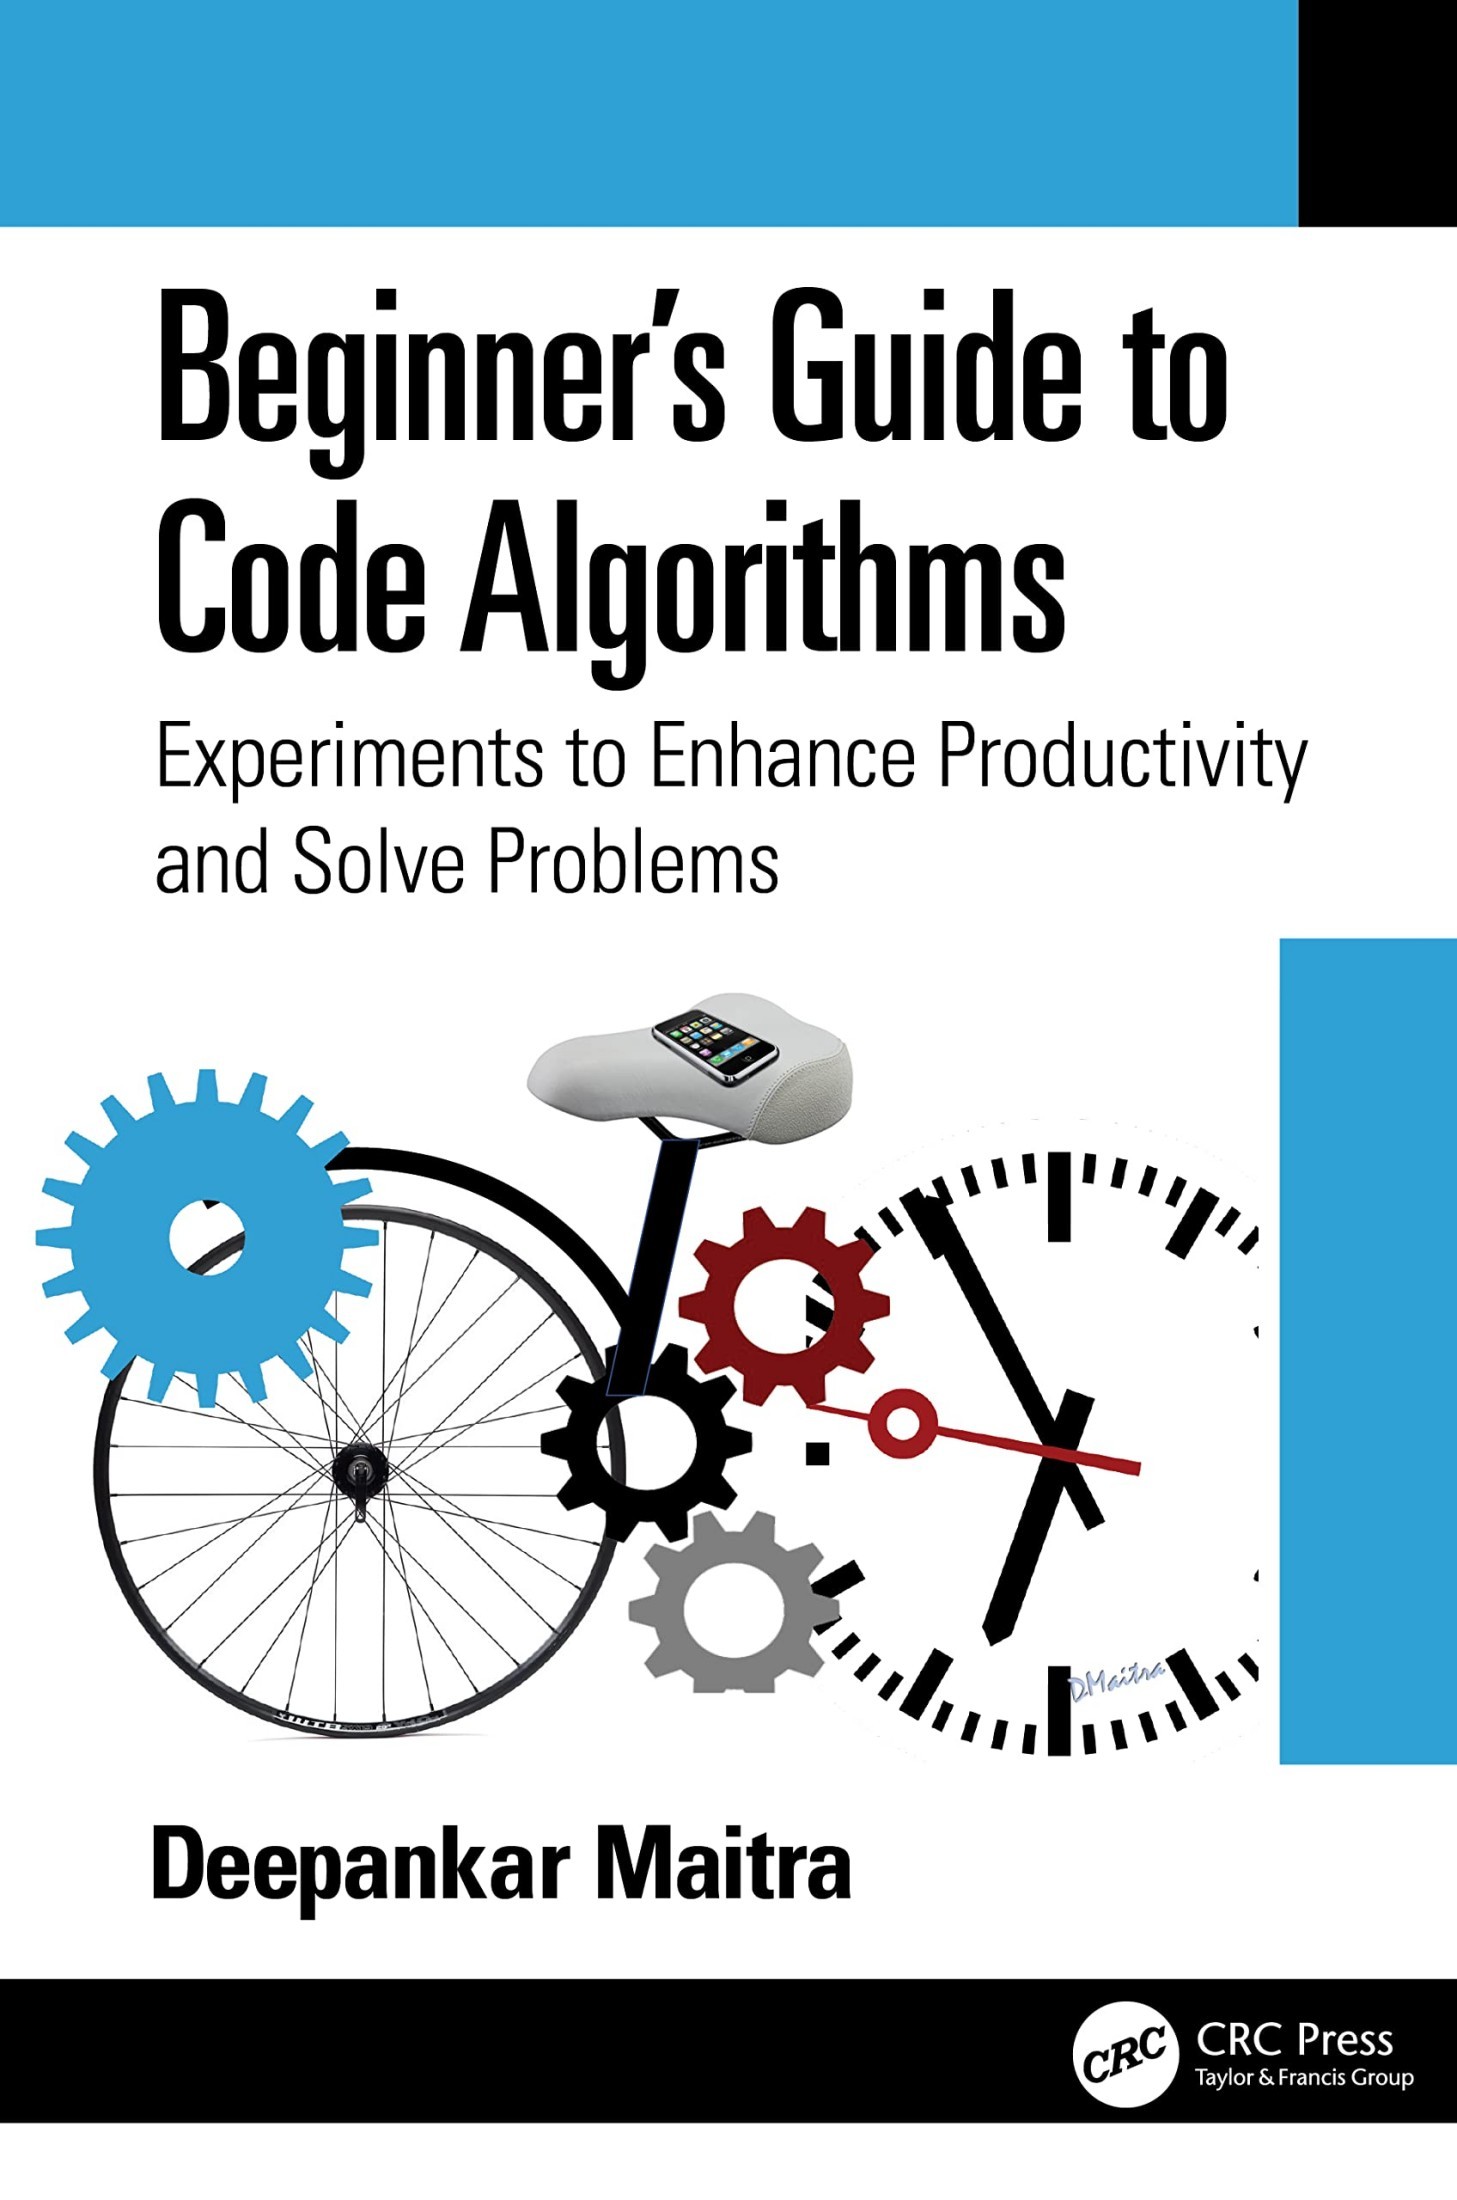 Beginner's Guide to Code Algorithms: Experiments to Enhance Productivity and Solve Problems